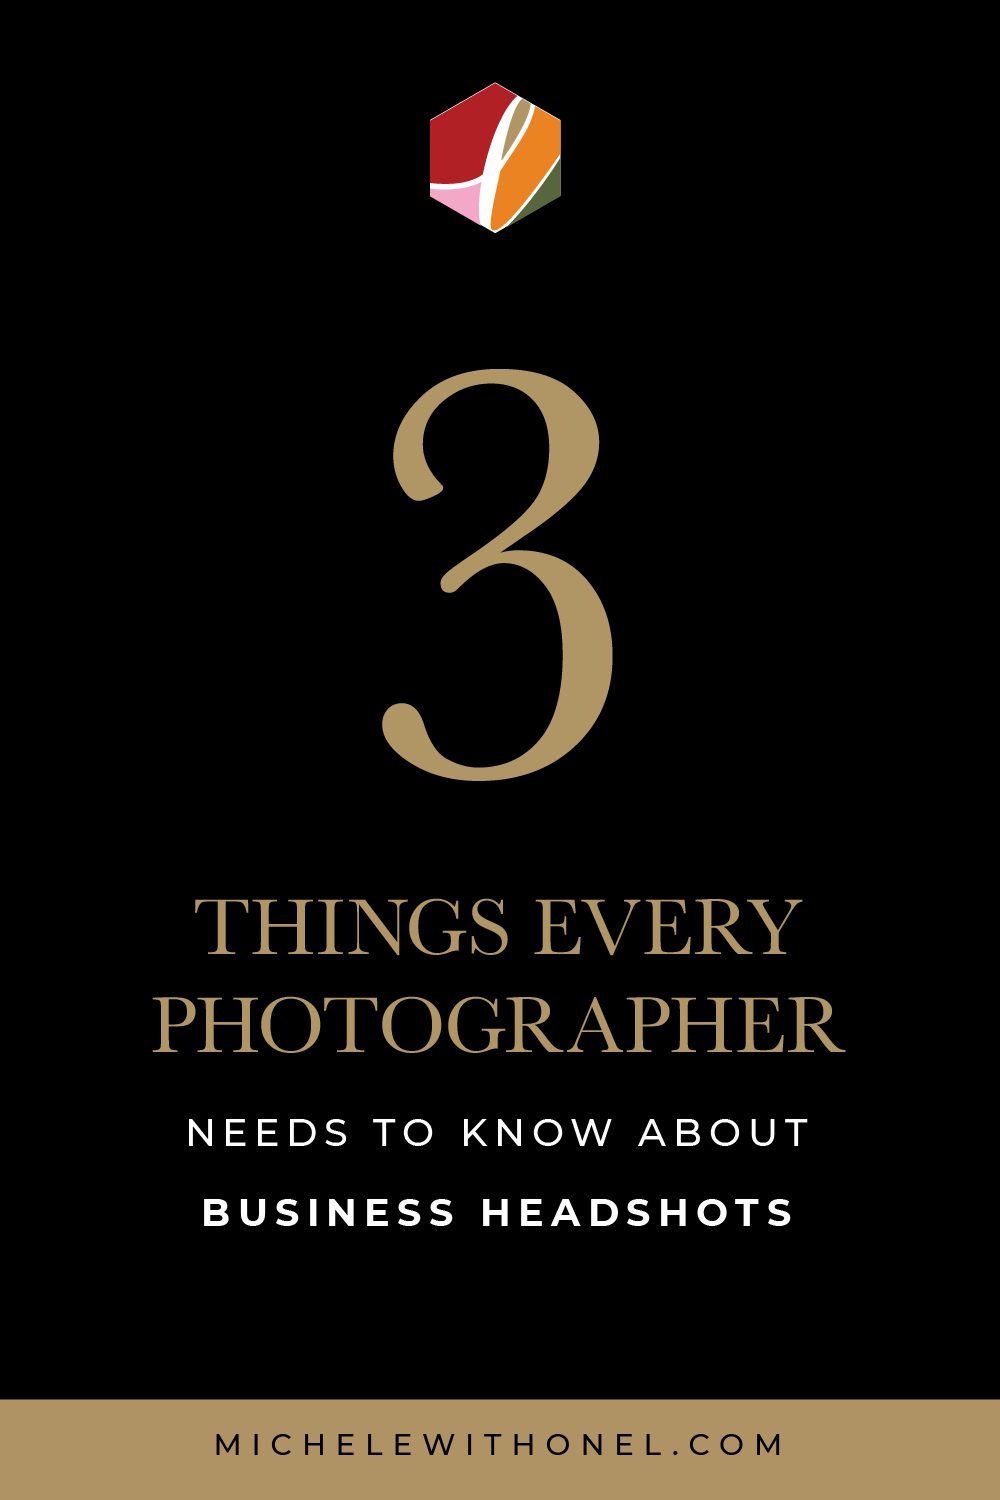 Interested in learning some headshot tips for photographers? This post is for you! Learn how to take great professional headshots of anyone—including how to pose, light, choose the right lens, and how branding photography can help other aspects of your business. #branding #photography #headshots #business